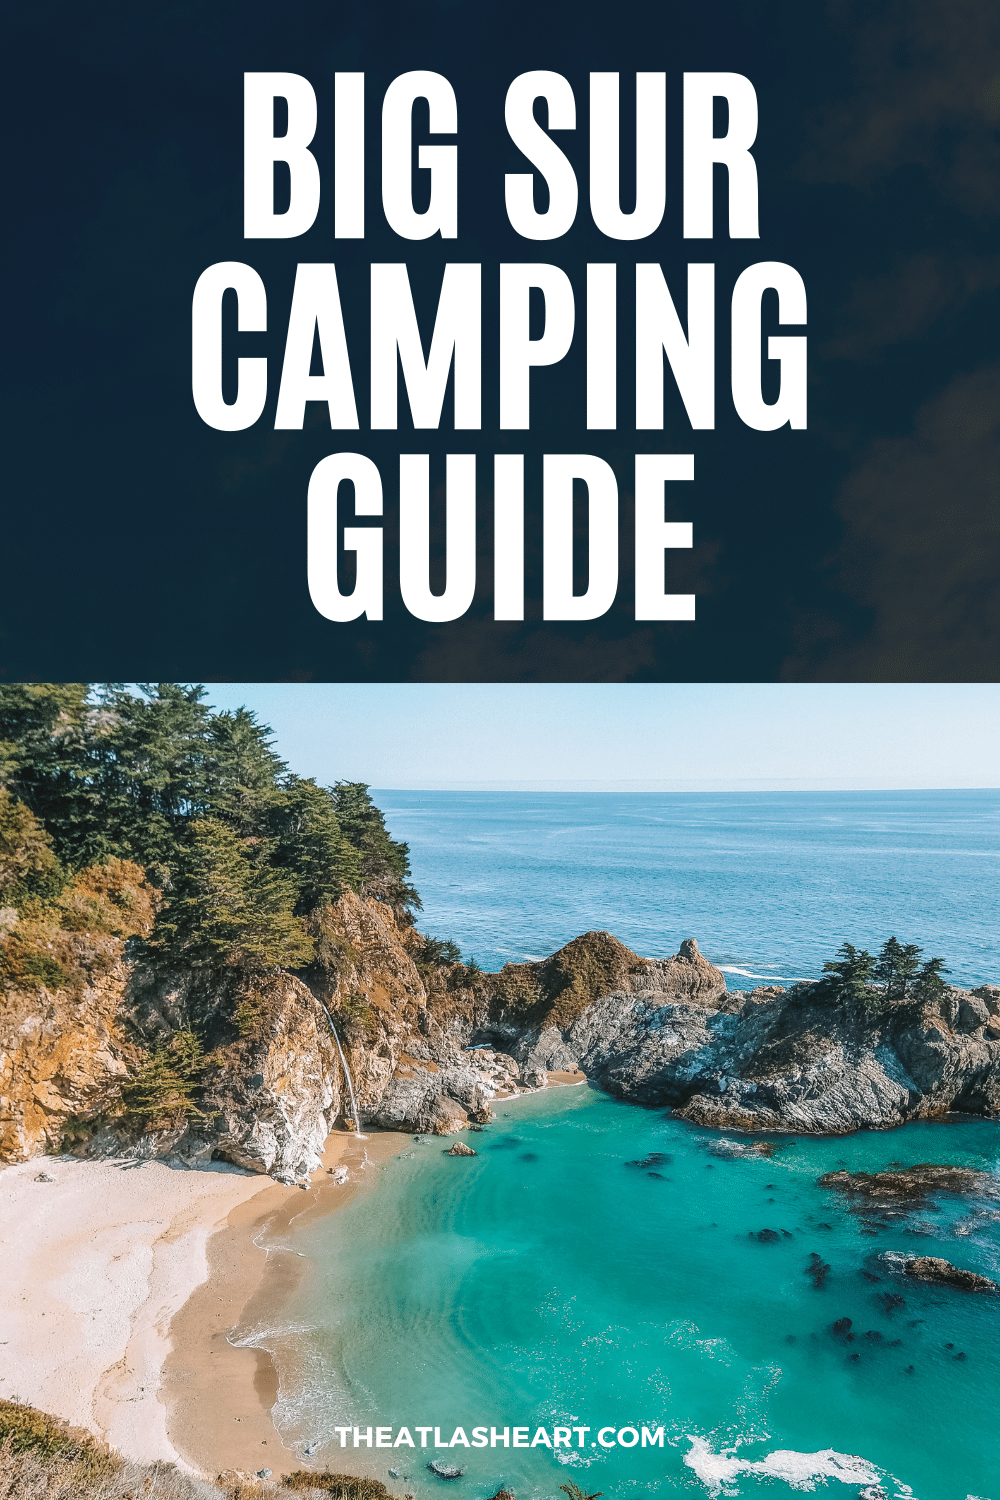 Big Sur Camping Guide: 12 Best Big Sur Campgrounds in 2022